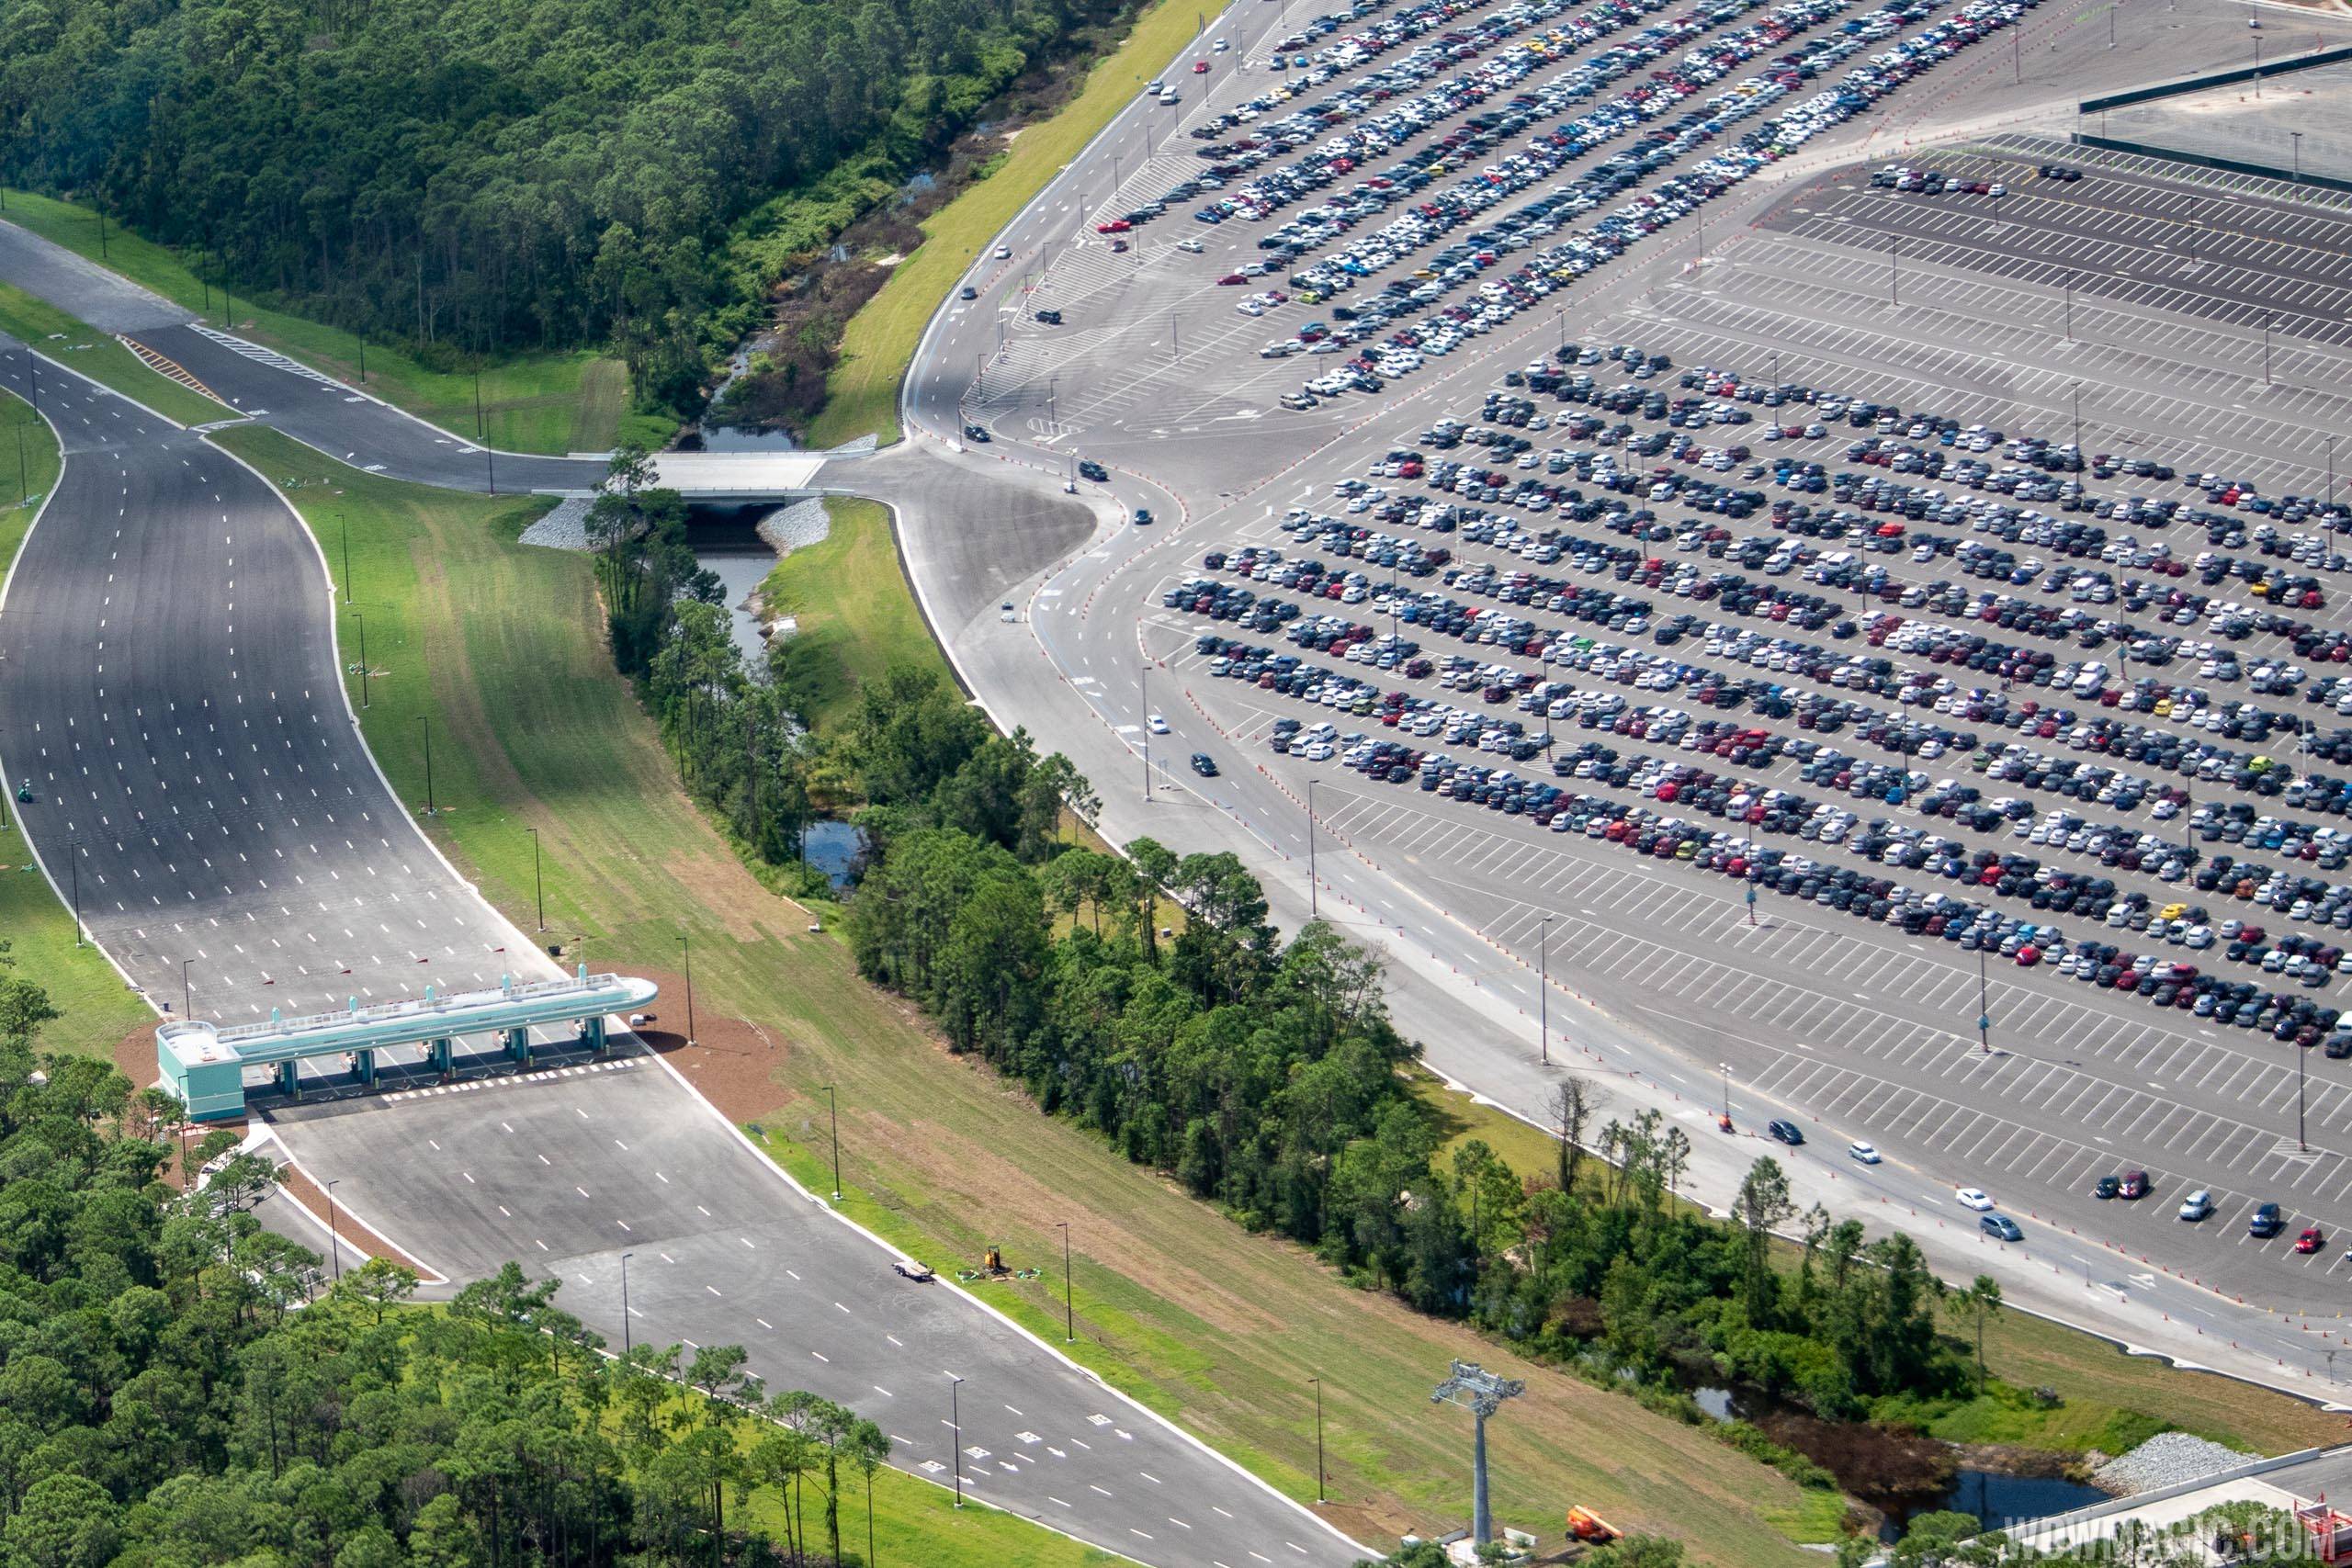 WDW News Today - PHOTO: Universal Orlando Resort Raises Prime Parking Rate  by $10